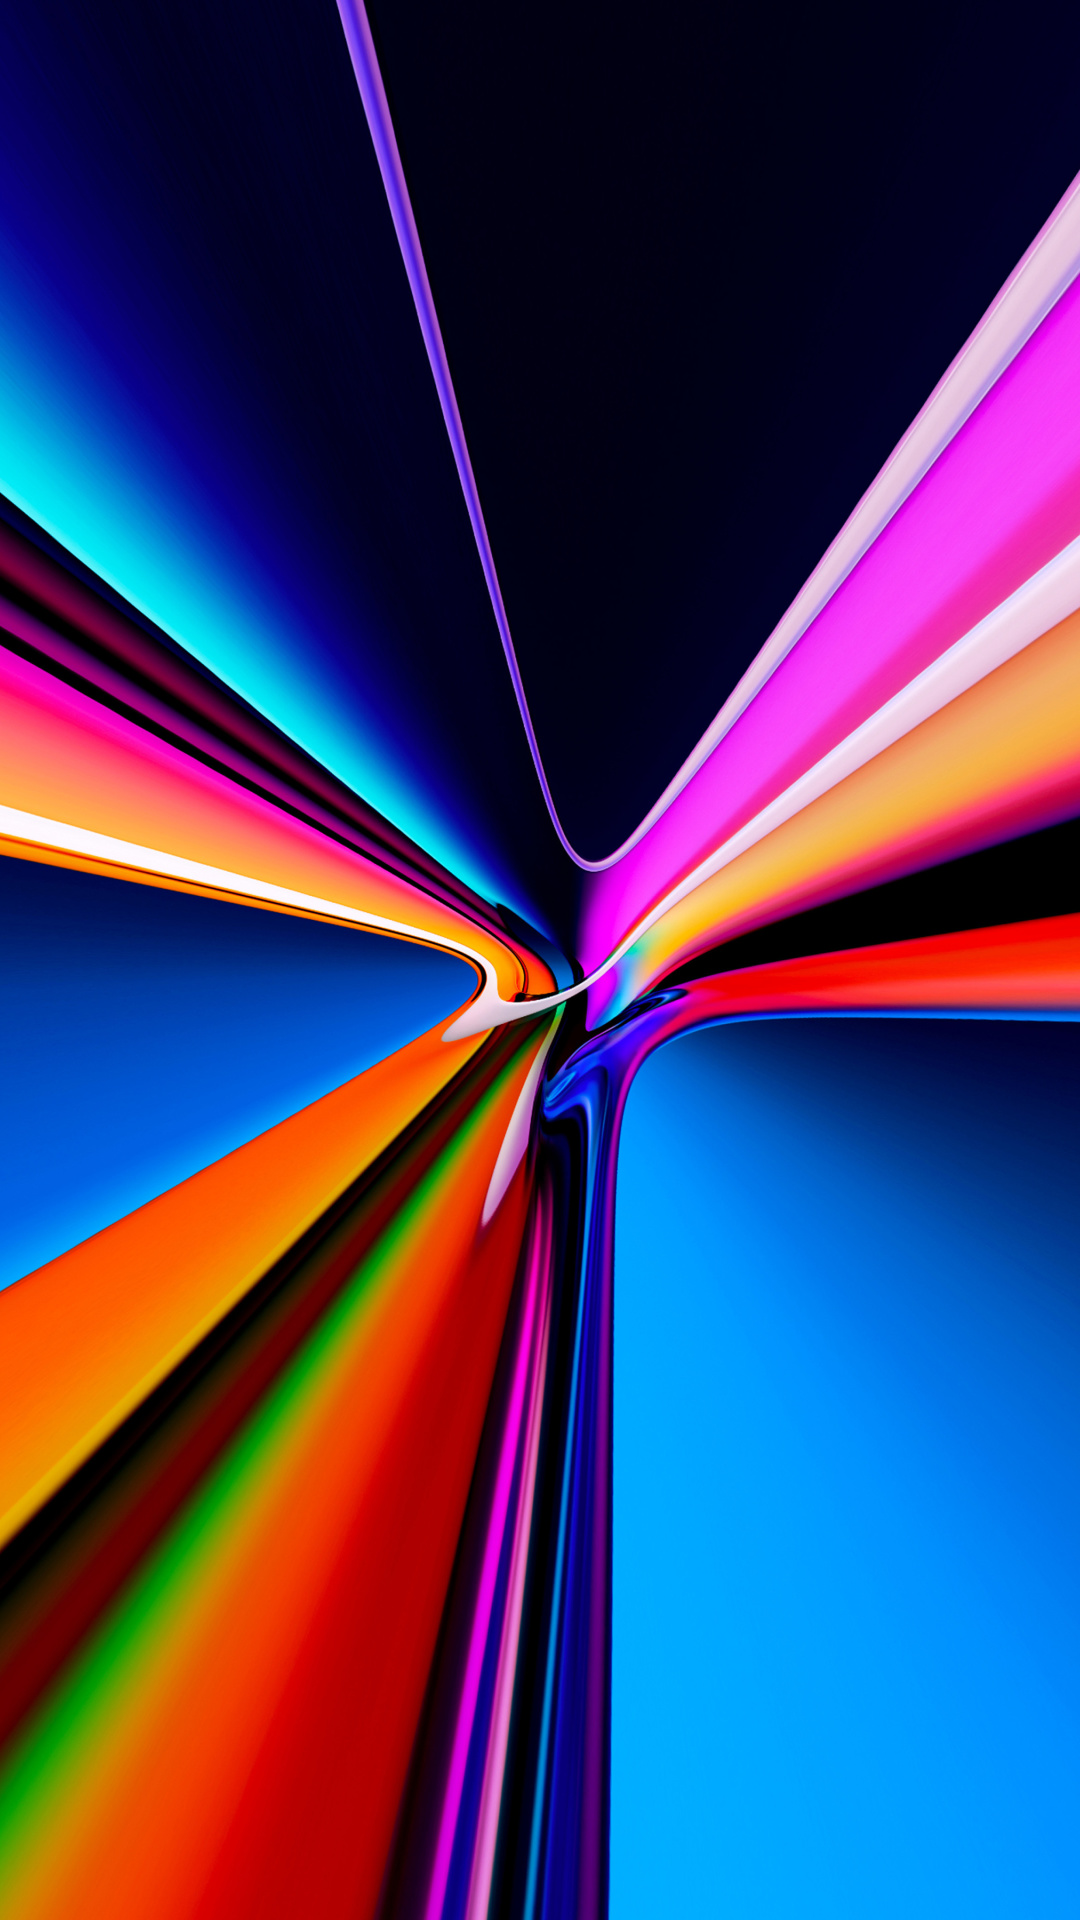 Pipes Glowing Colors wallpaper 1080x1920